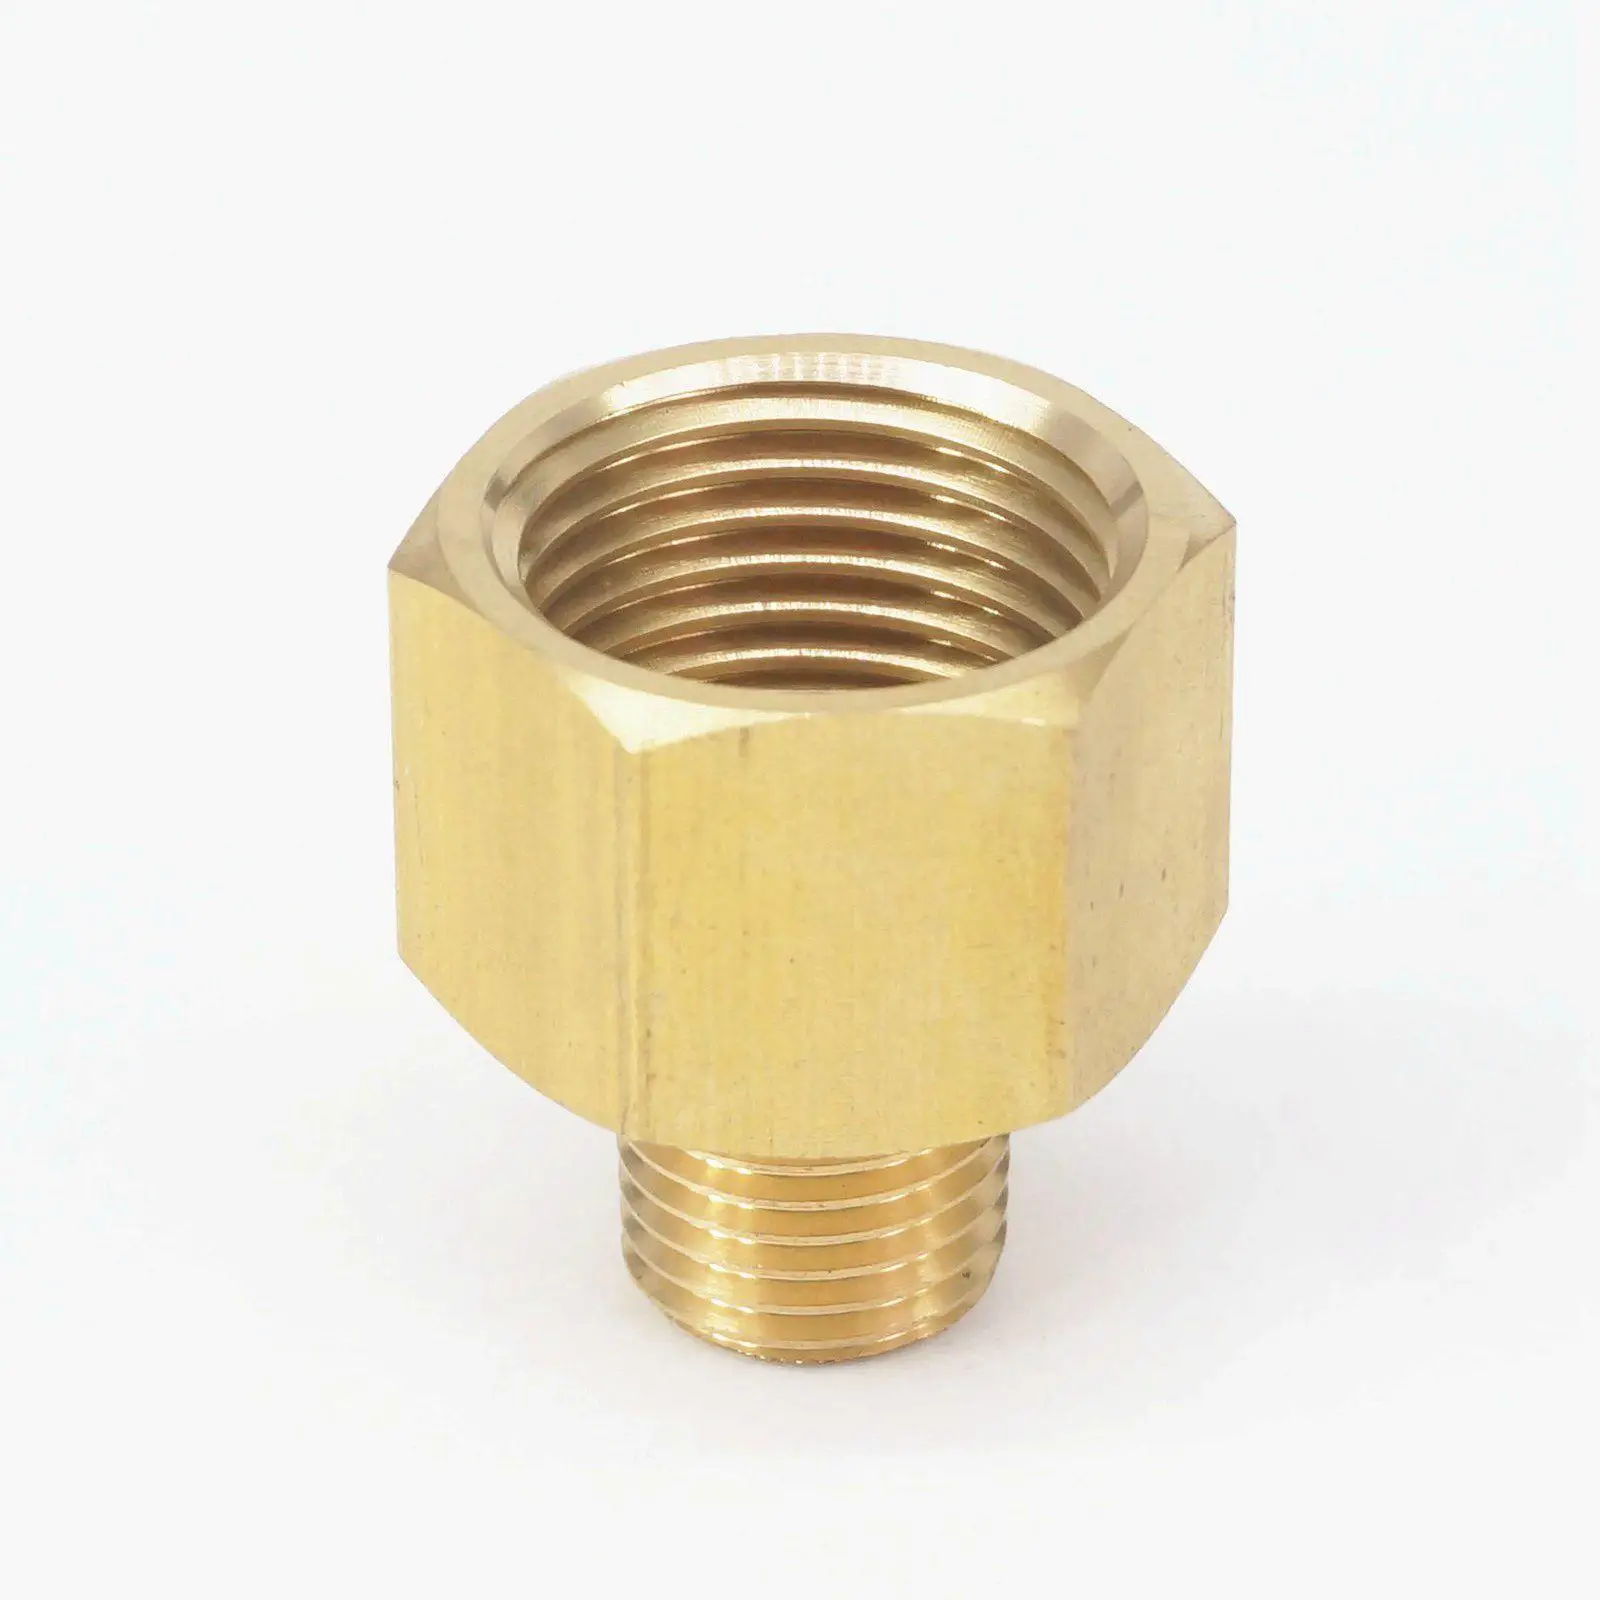 BRASS REDUCING COUPLING 1/2 X 1/4 FEMALE NPT PIPE FITTING ADAPTER AIR FUEL WATER 